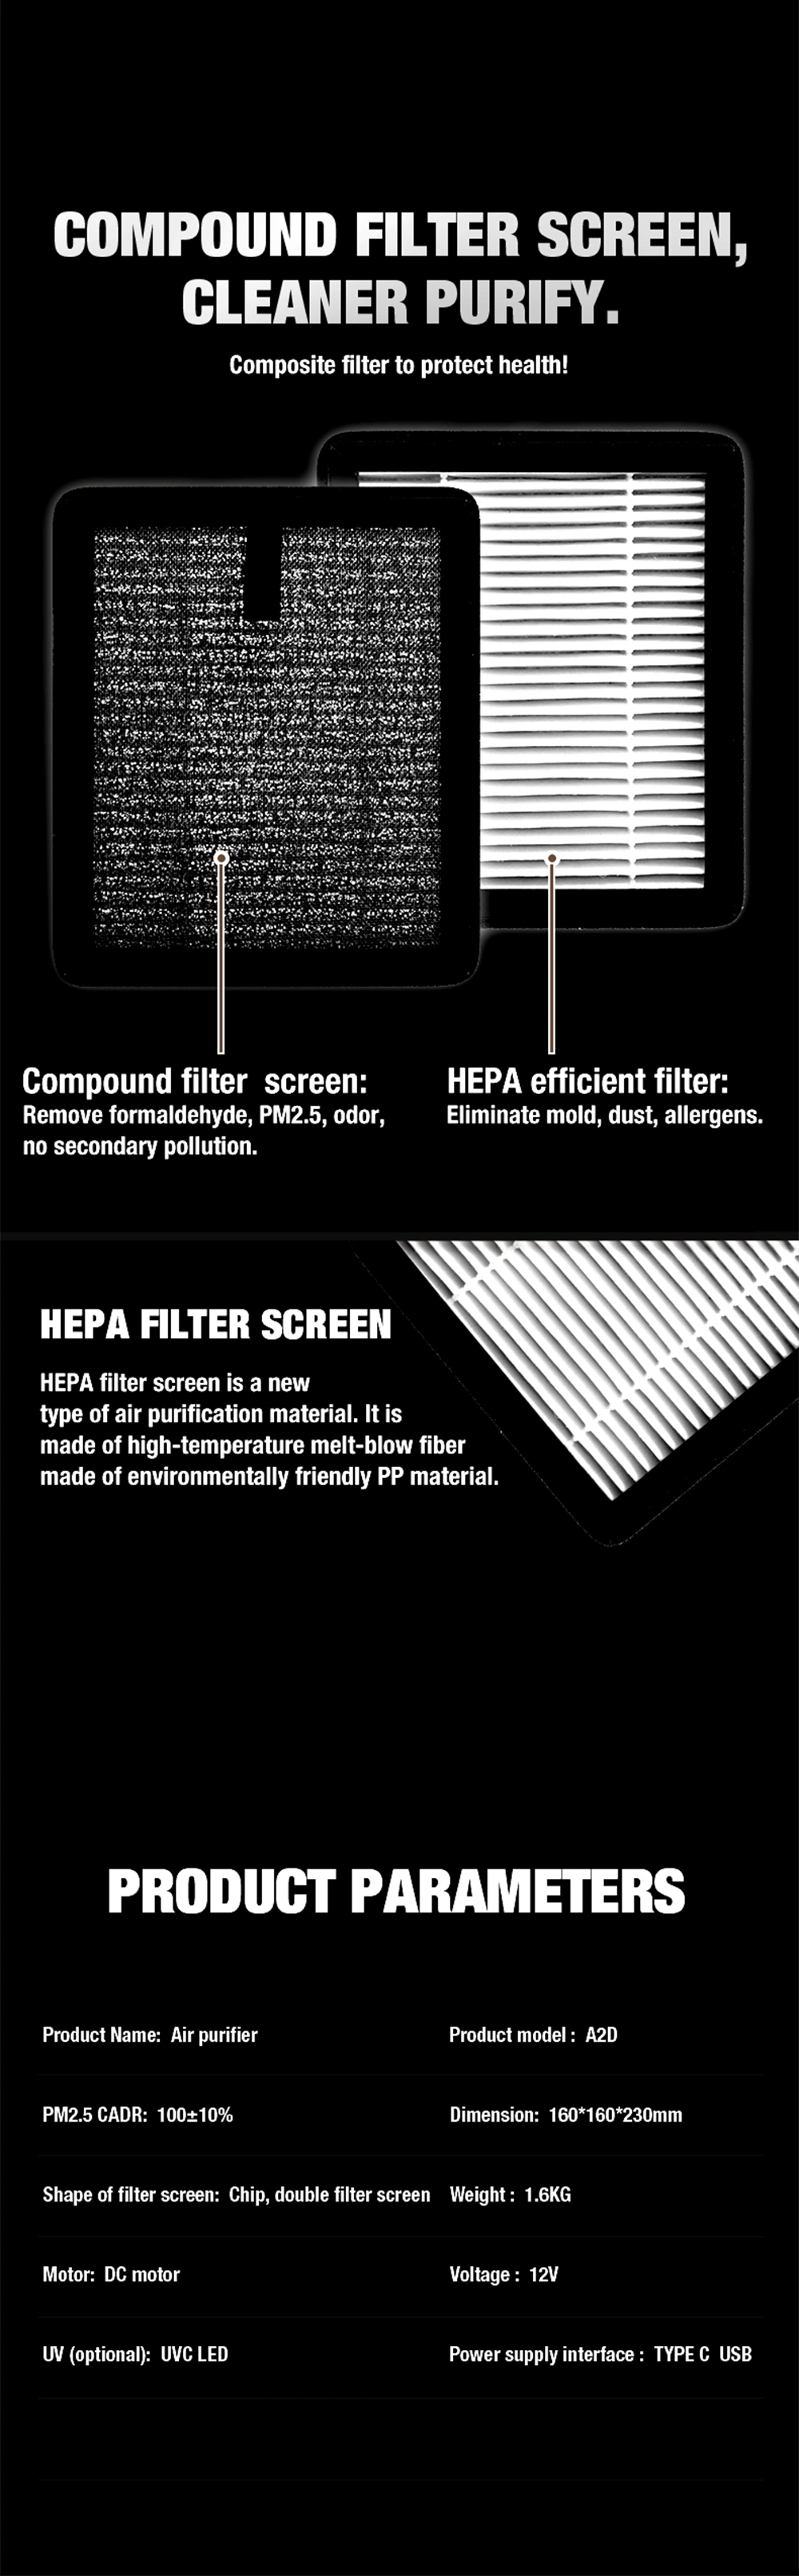 Home Appliance Household Portable Purification Smart Air Purifier H13 True HEPA Filter Cleaner